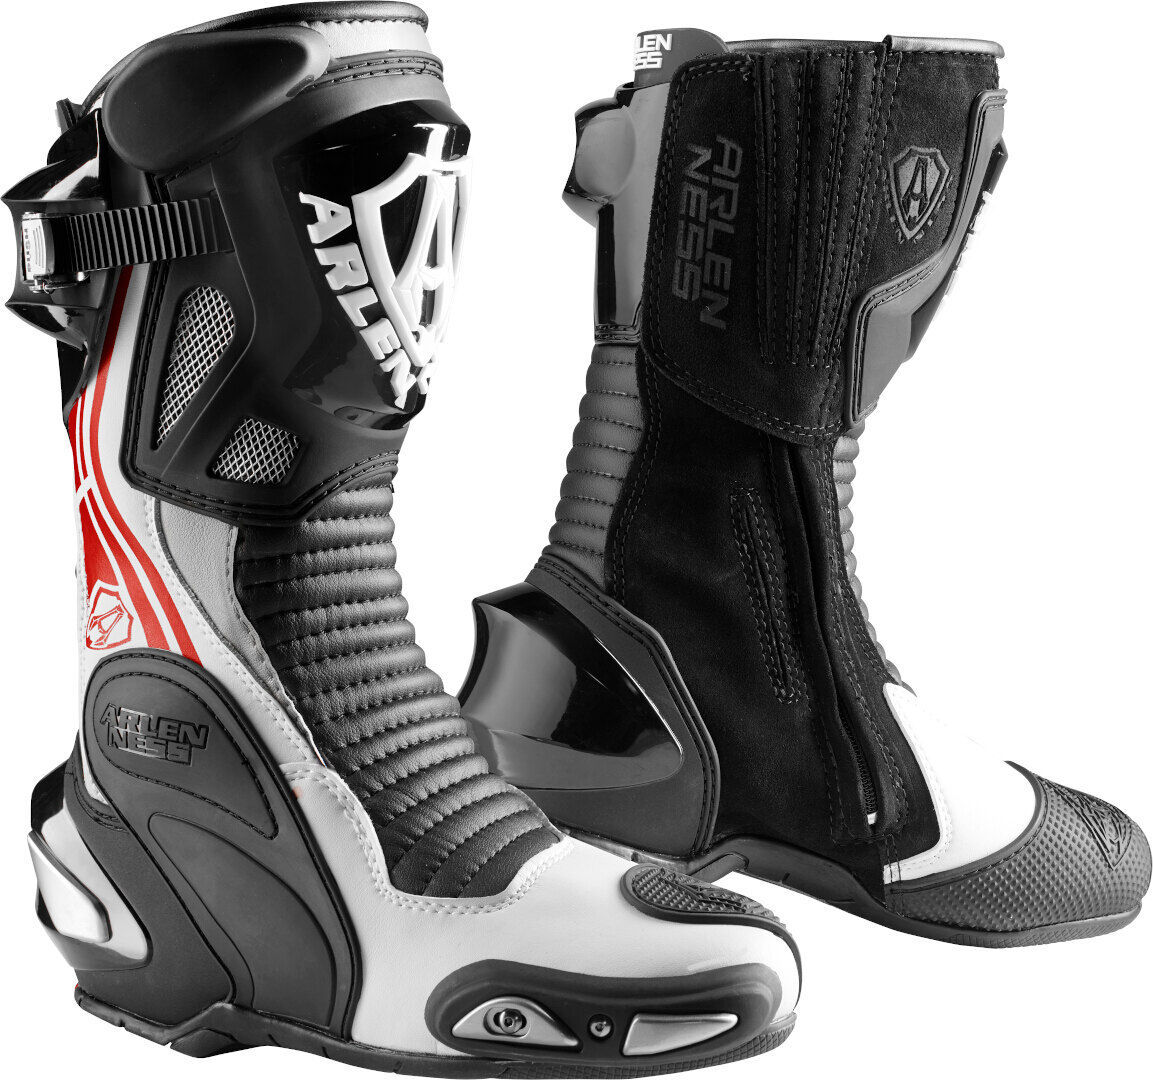 Arlen Ness Pro Shift 2 Motorcycle Boots  - Black White Red